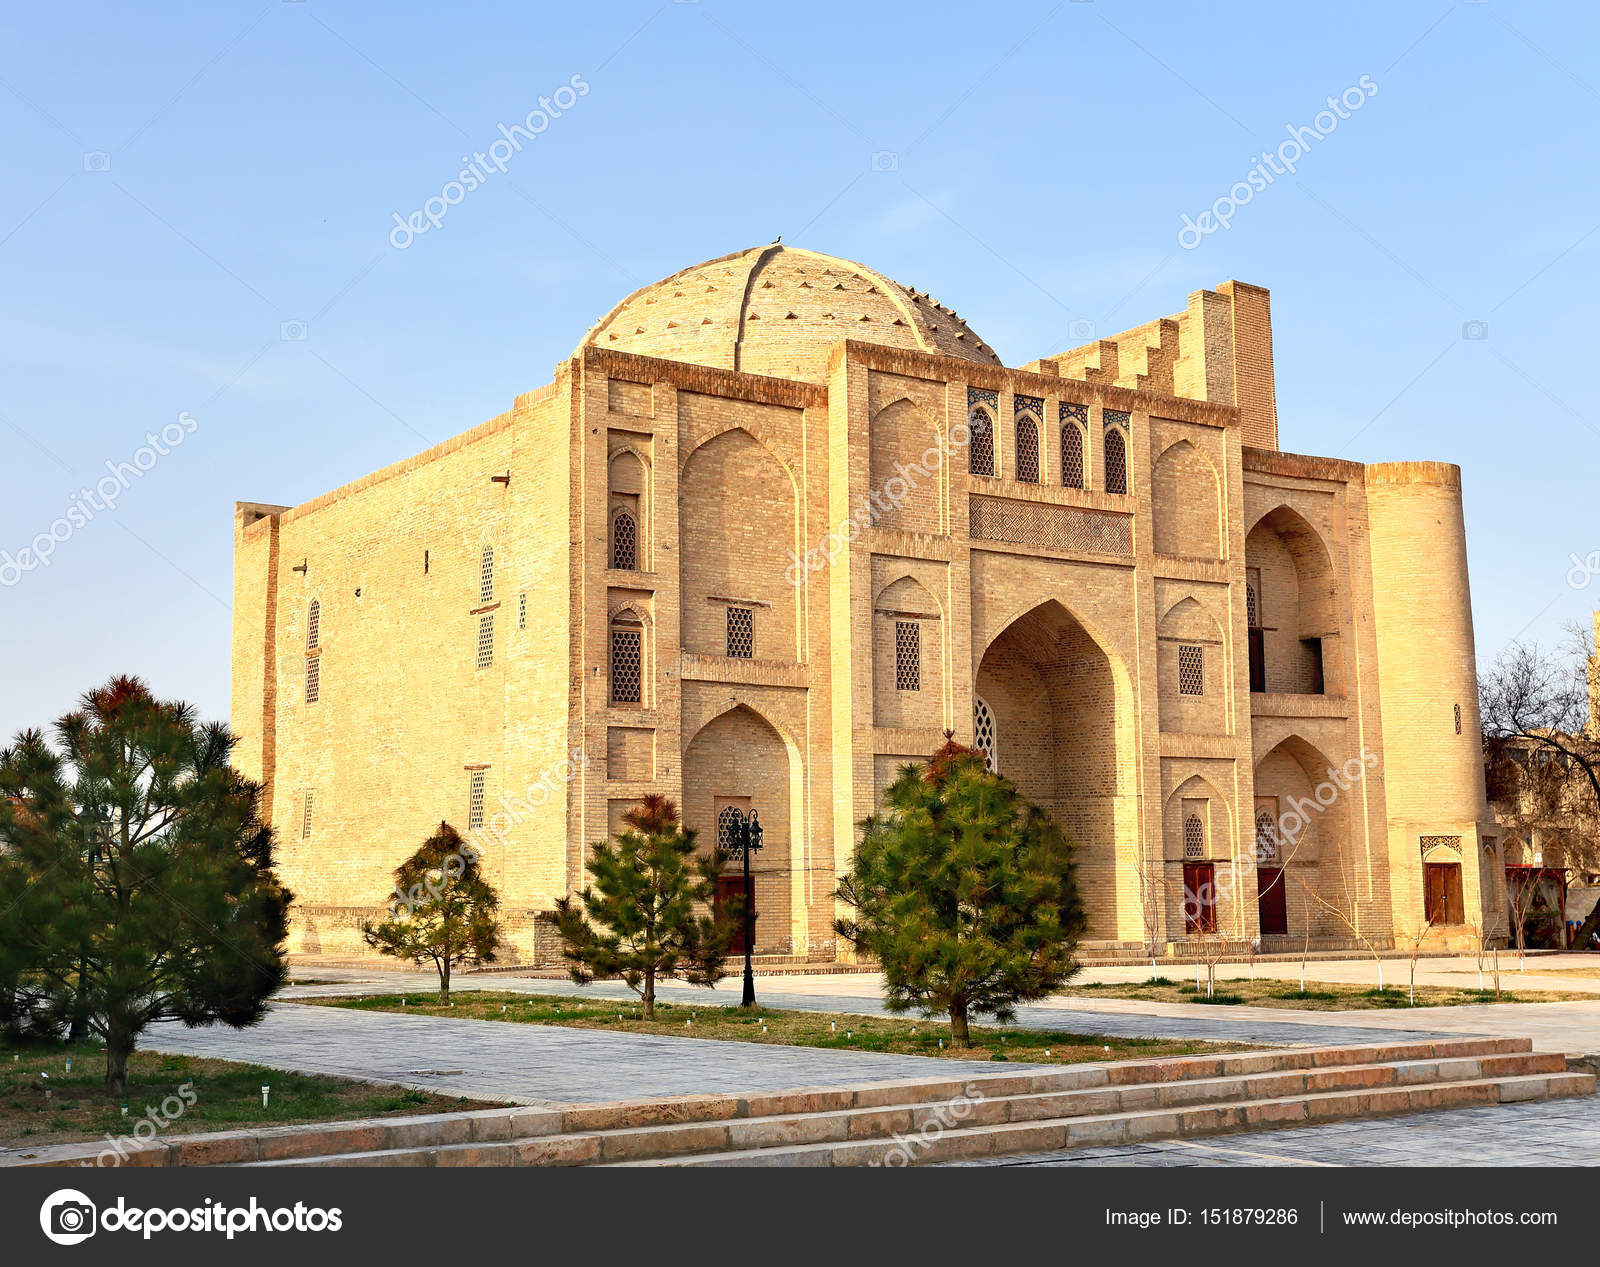 Medieval oriental structure — Stock Photo © pingvin121674 #151879286